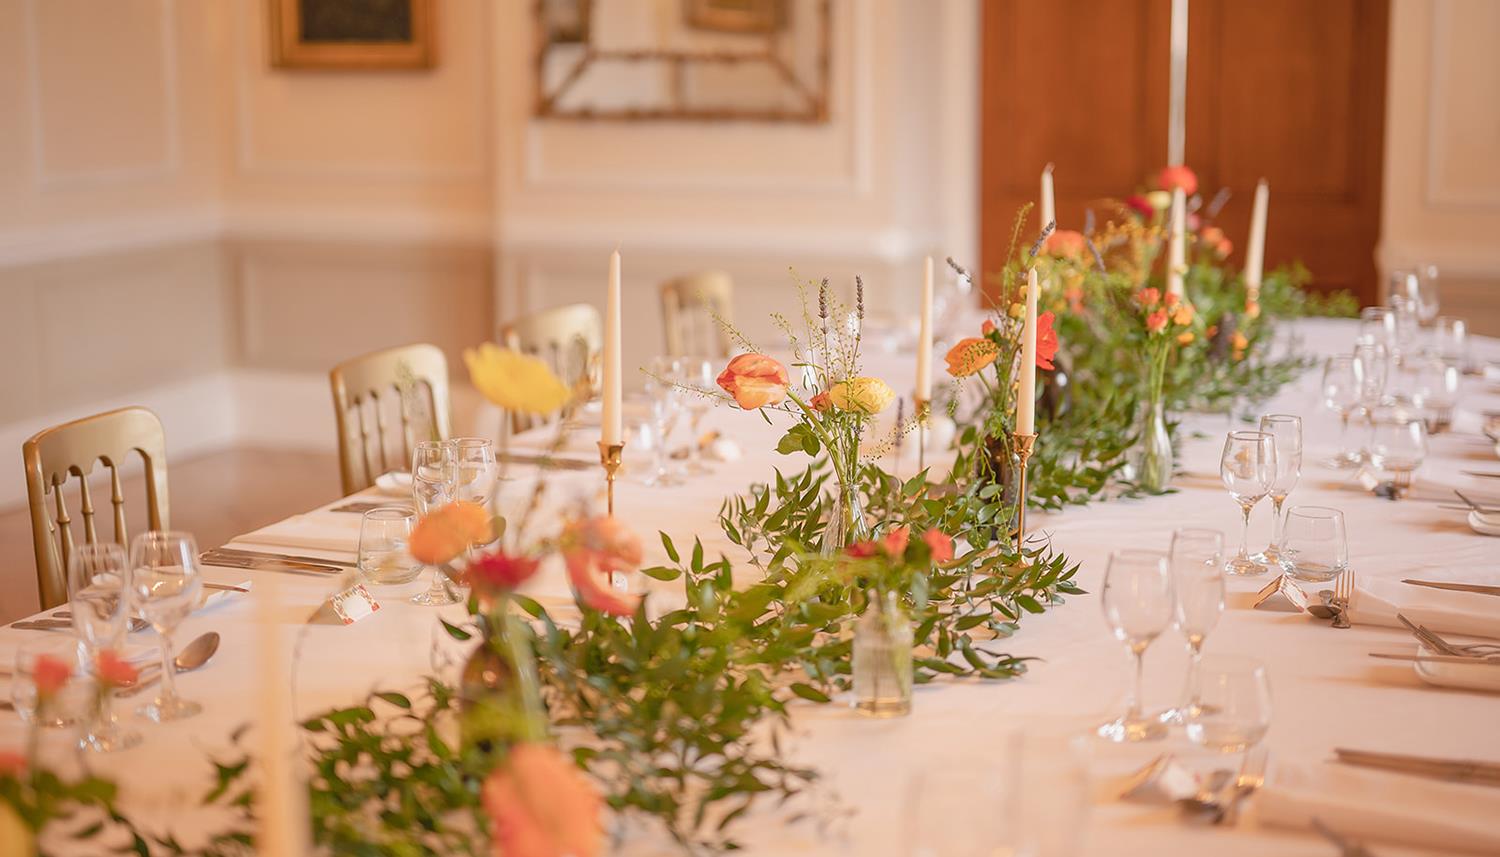 Flowers and candles at the table. Photo Credit: Duncan Ireland Photography